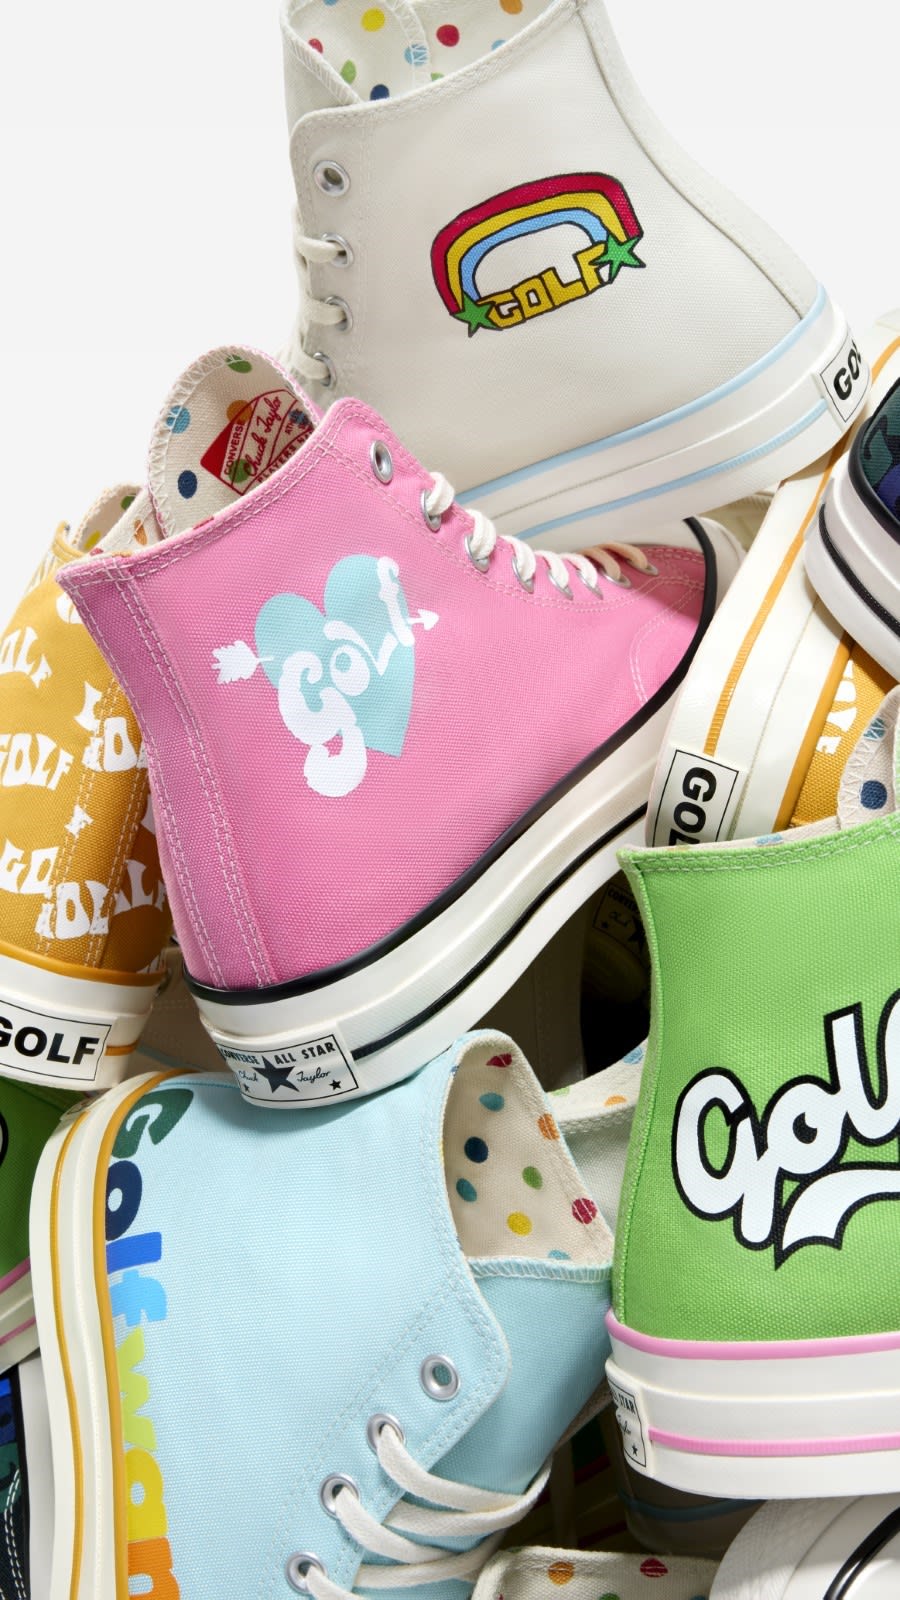 You Can Make Your Own Golf Wang x Converse Sneaker | Complex